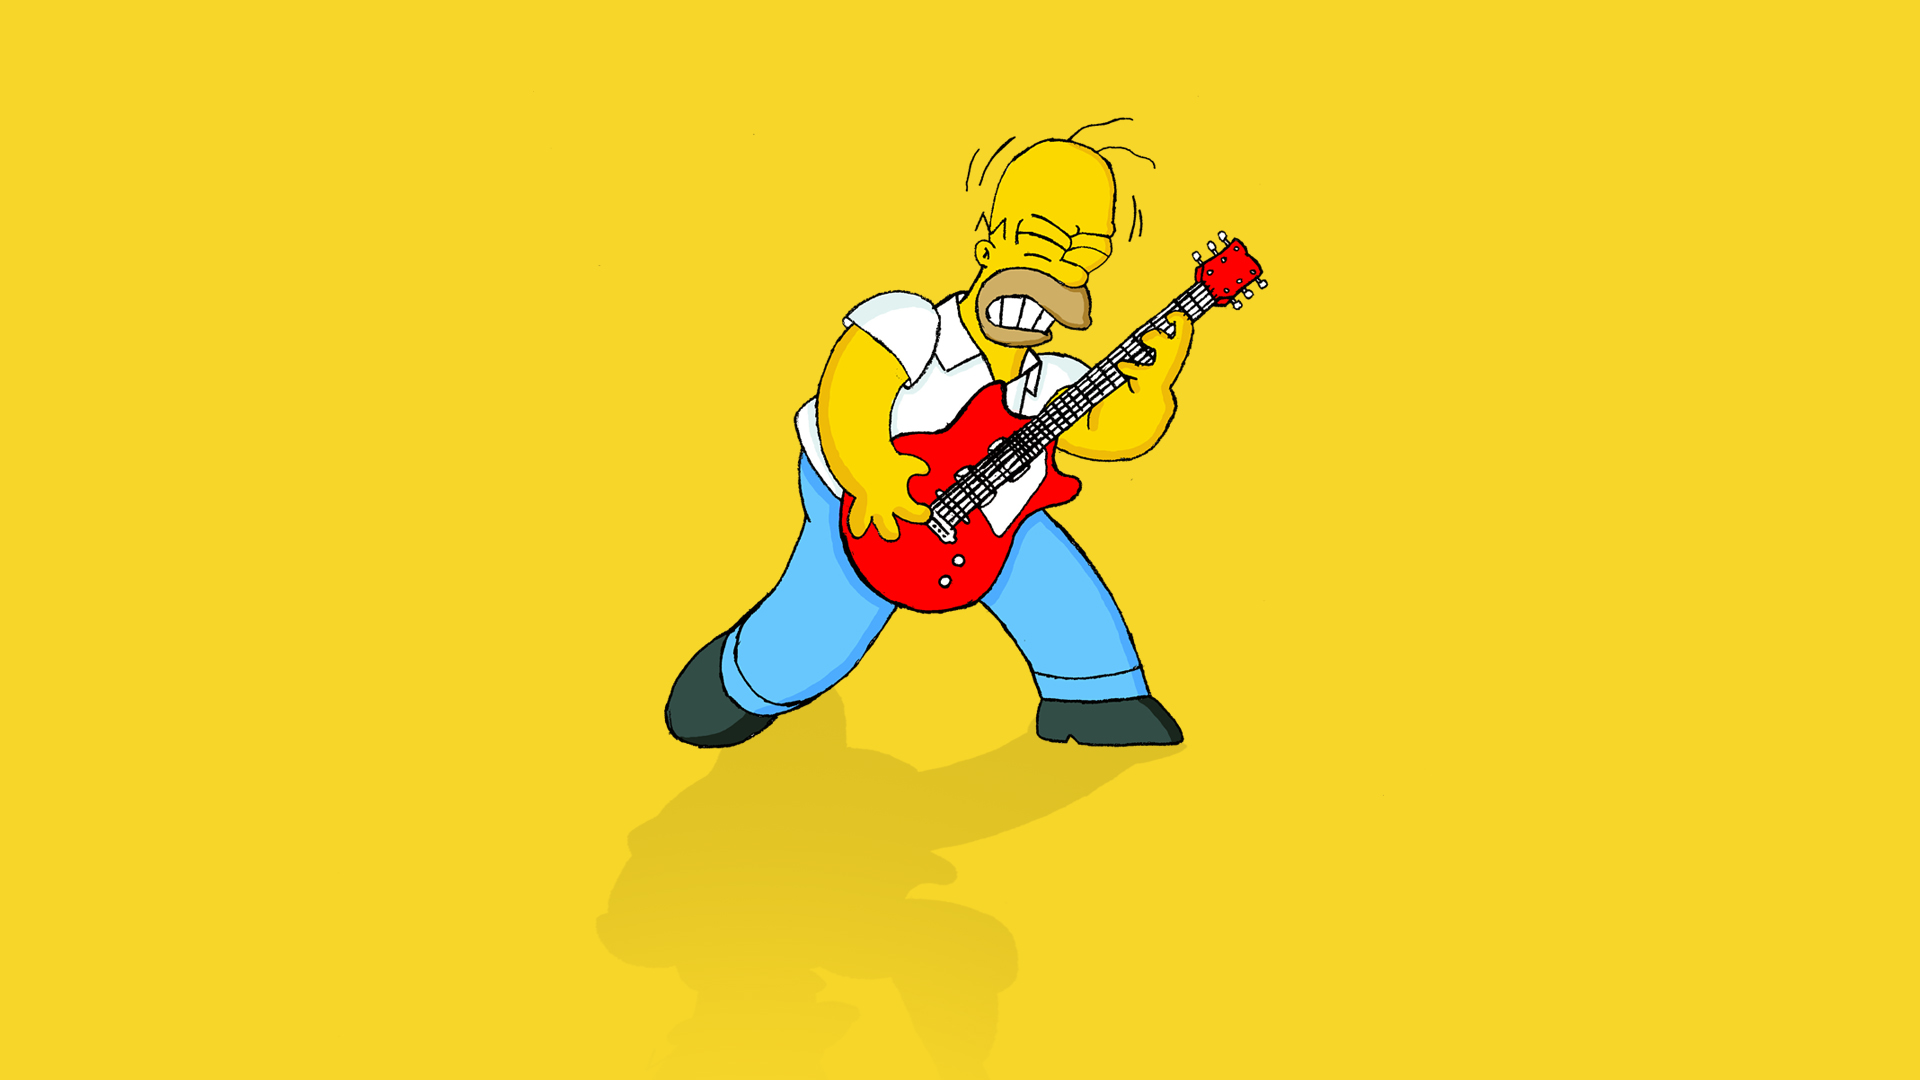 Wallpaper Homer Simpson Jpg Pictures To Pin